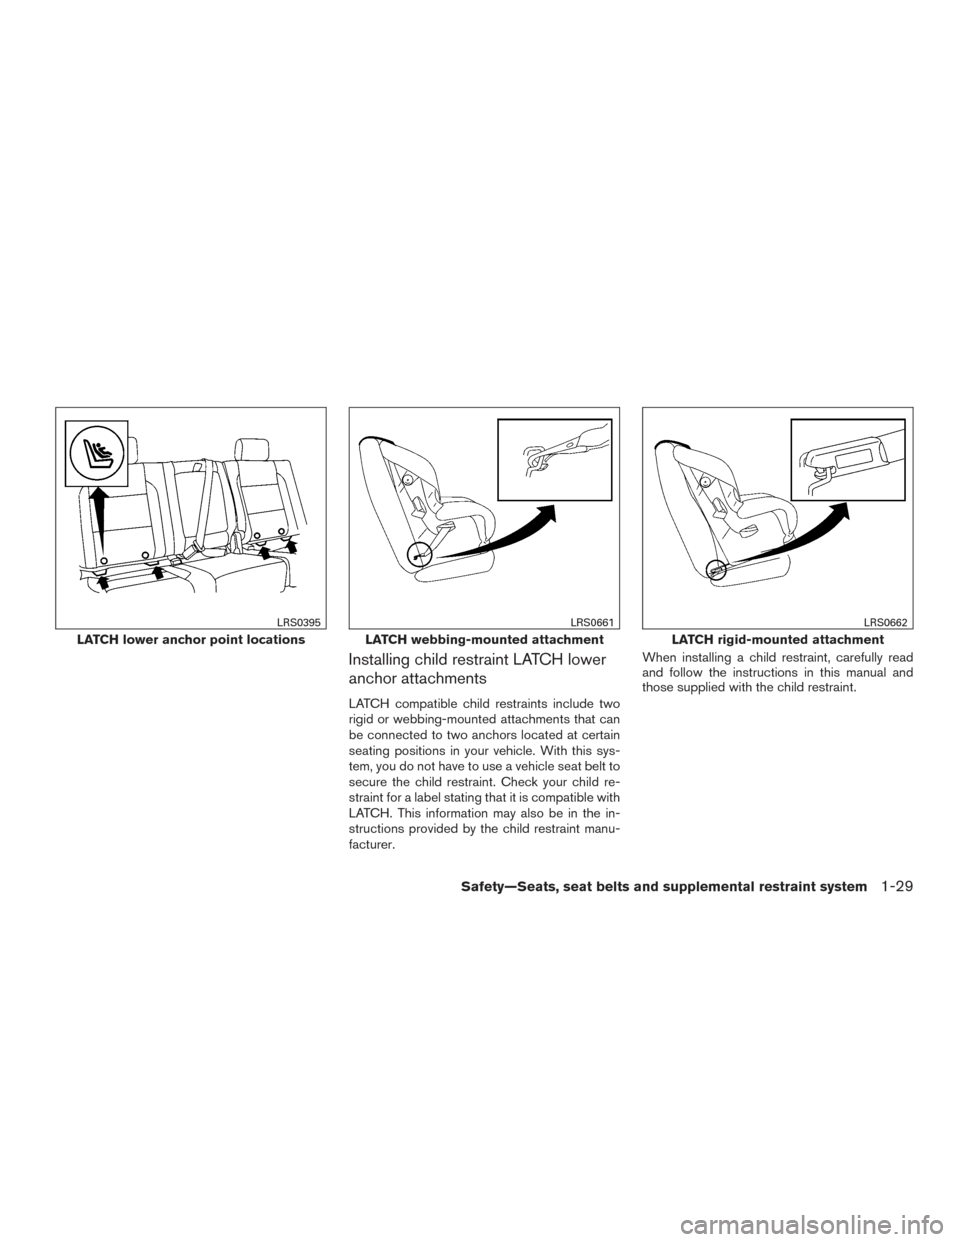 NISSAN TITAN 2015 1.G User Guide Installing child restraint LATCH lower
anchor attachments
LATCH compatible child restraints include two
rigid or webbing-mounted attachments that can
be connected to two anchors located at certain
sea